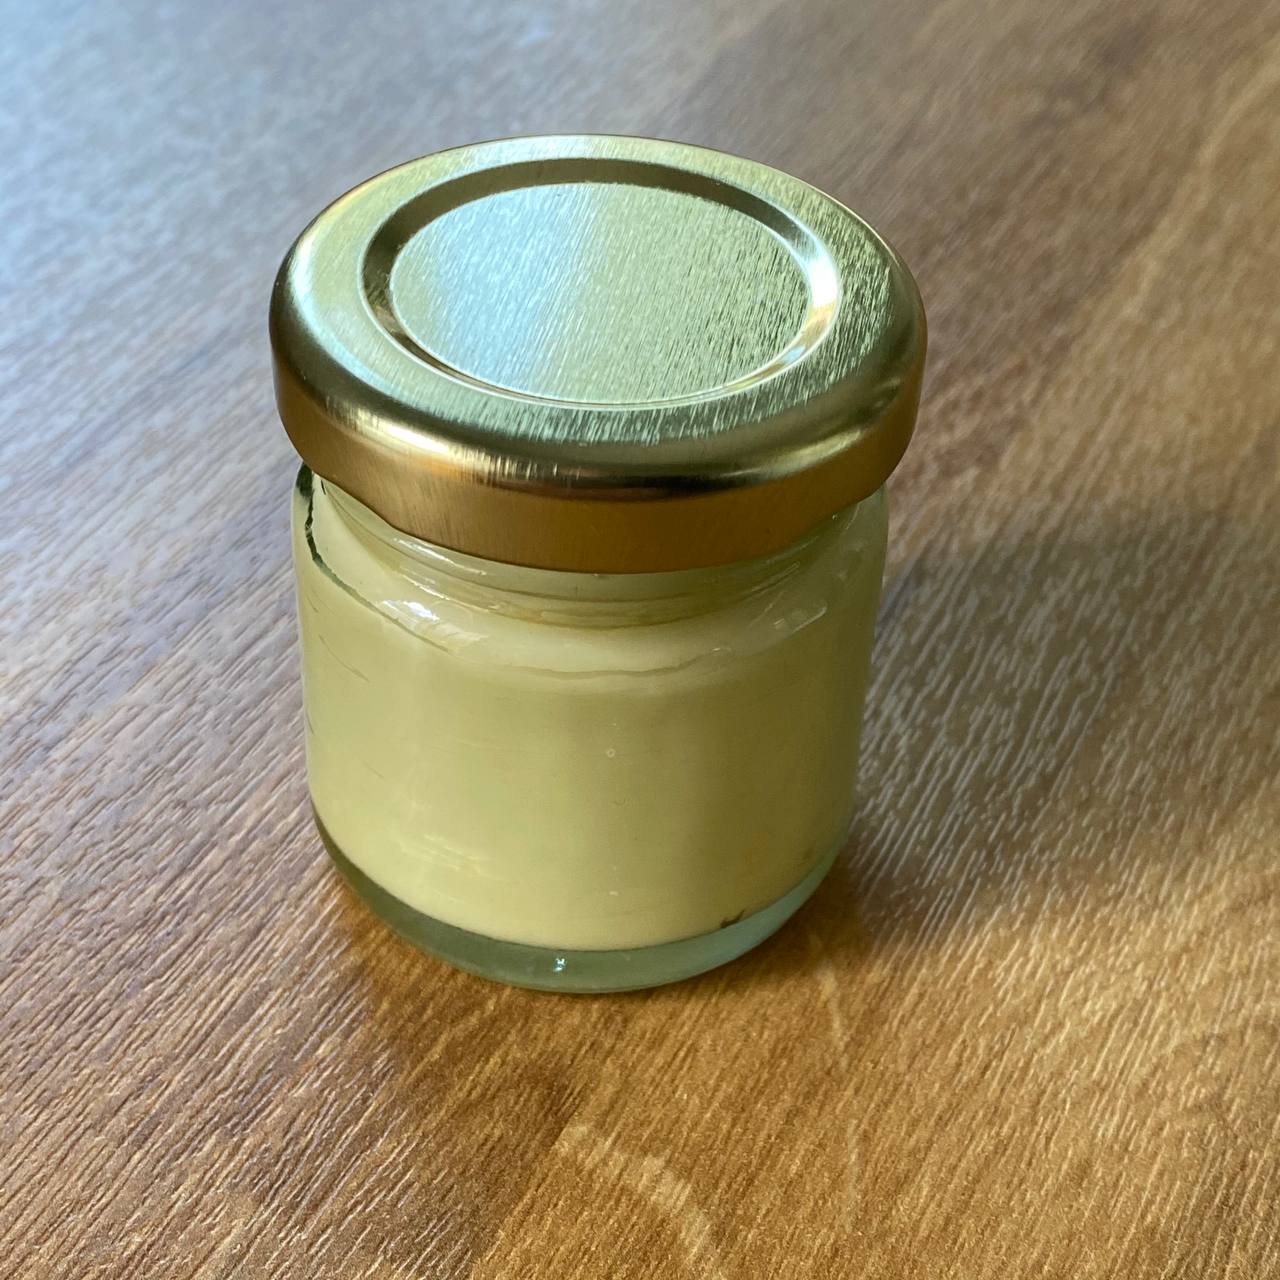 A homemade healing balm made with daisies